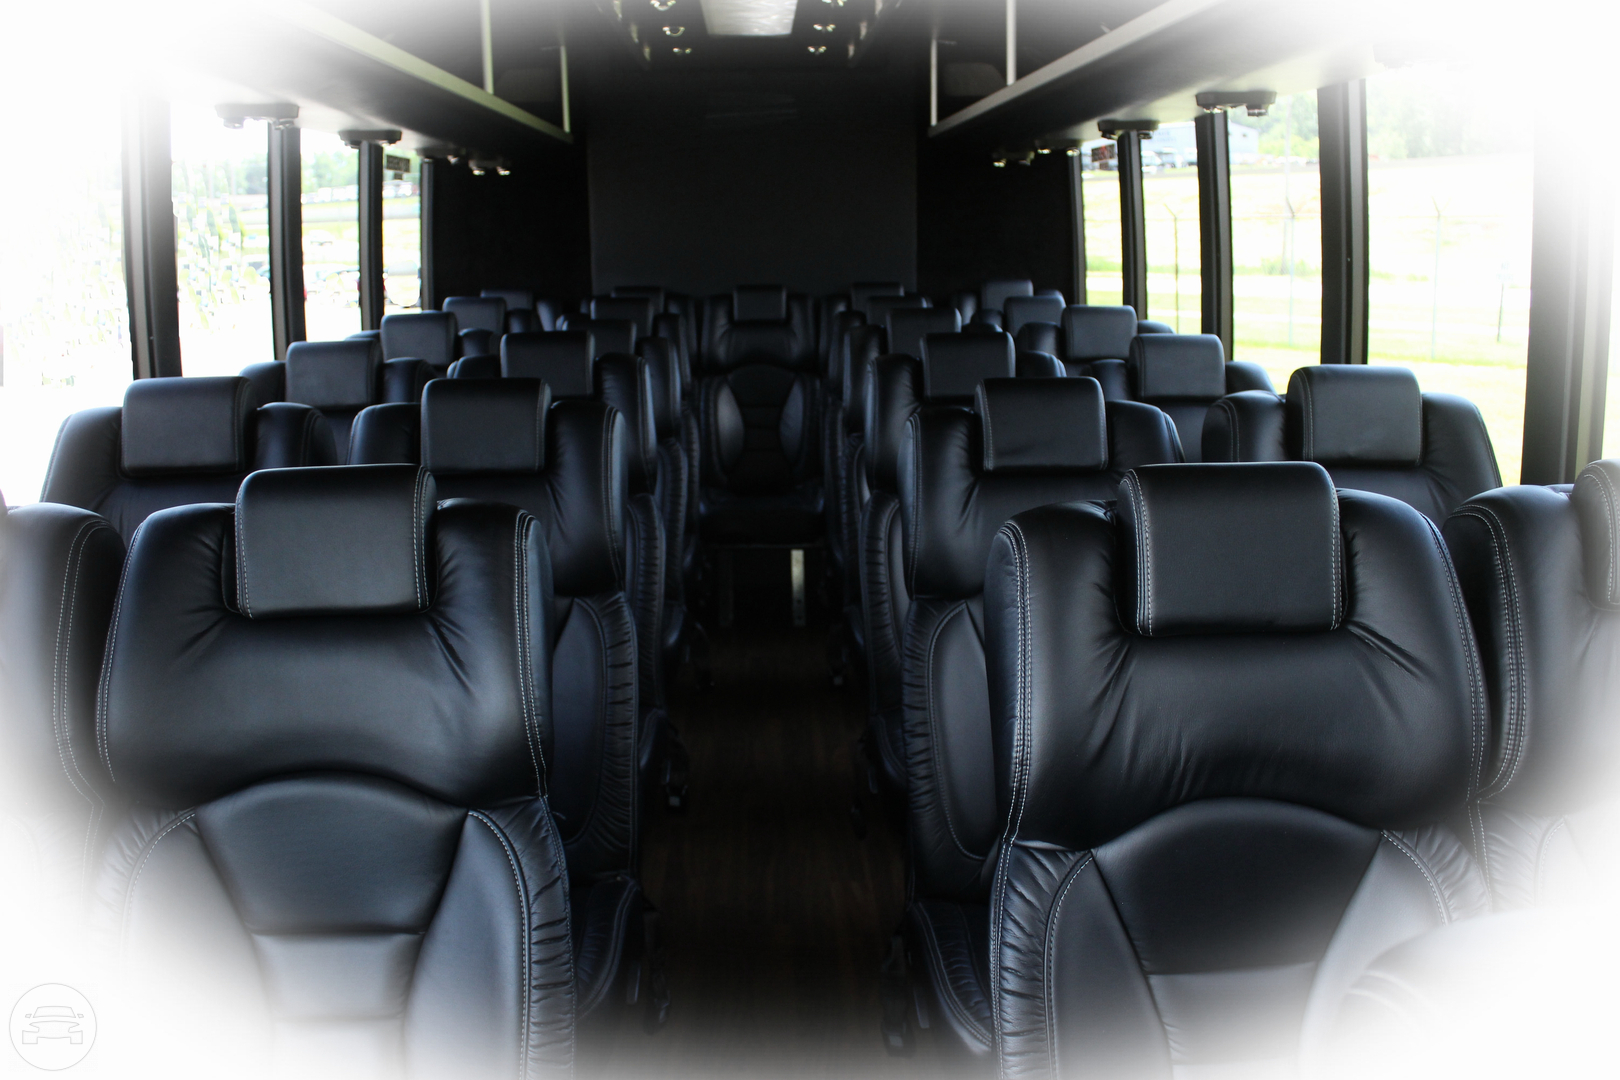 27 Passenger Executive Bus
Coach Bus /
Akron, OH

 / Hourly $0.00
